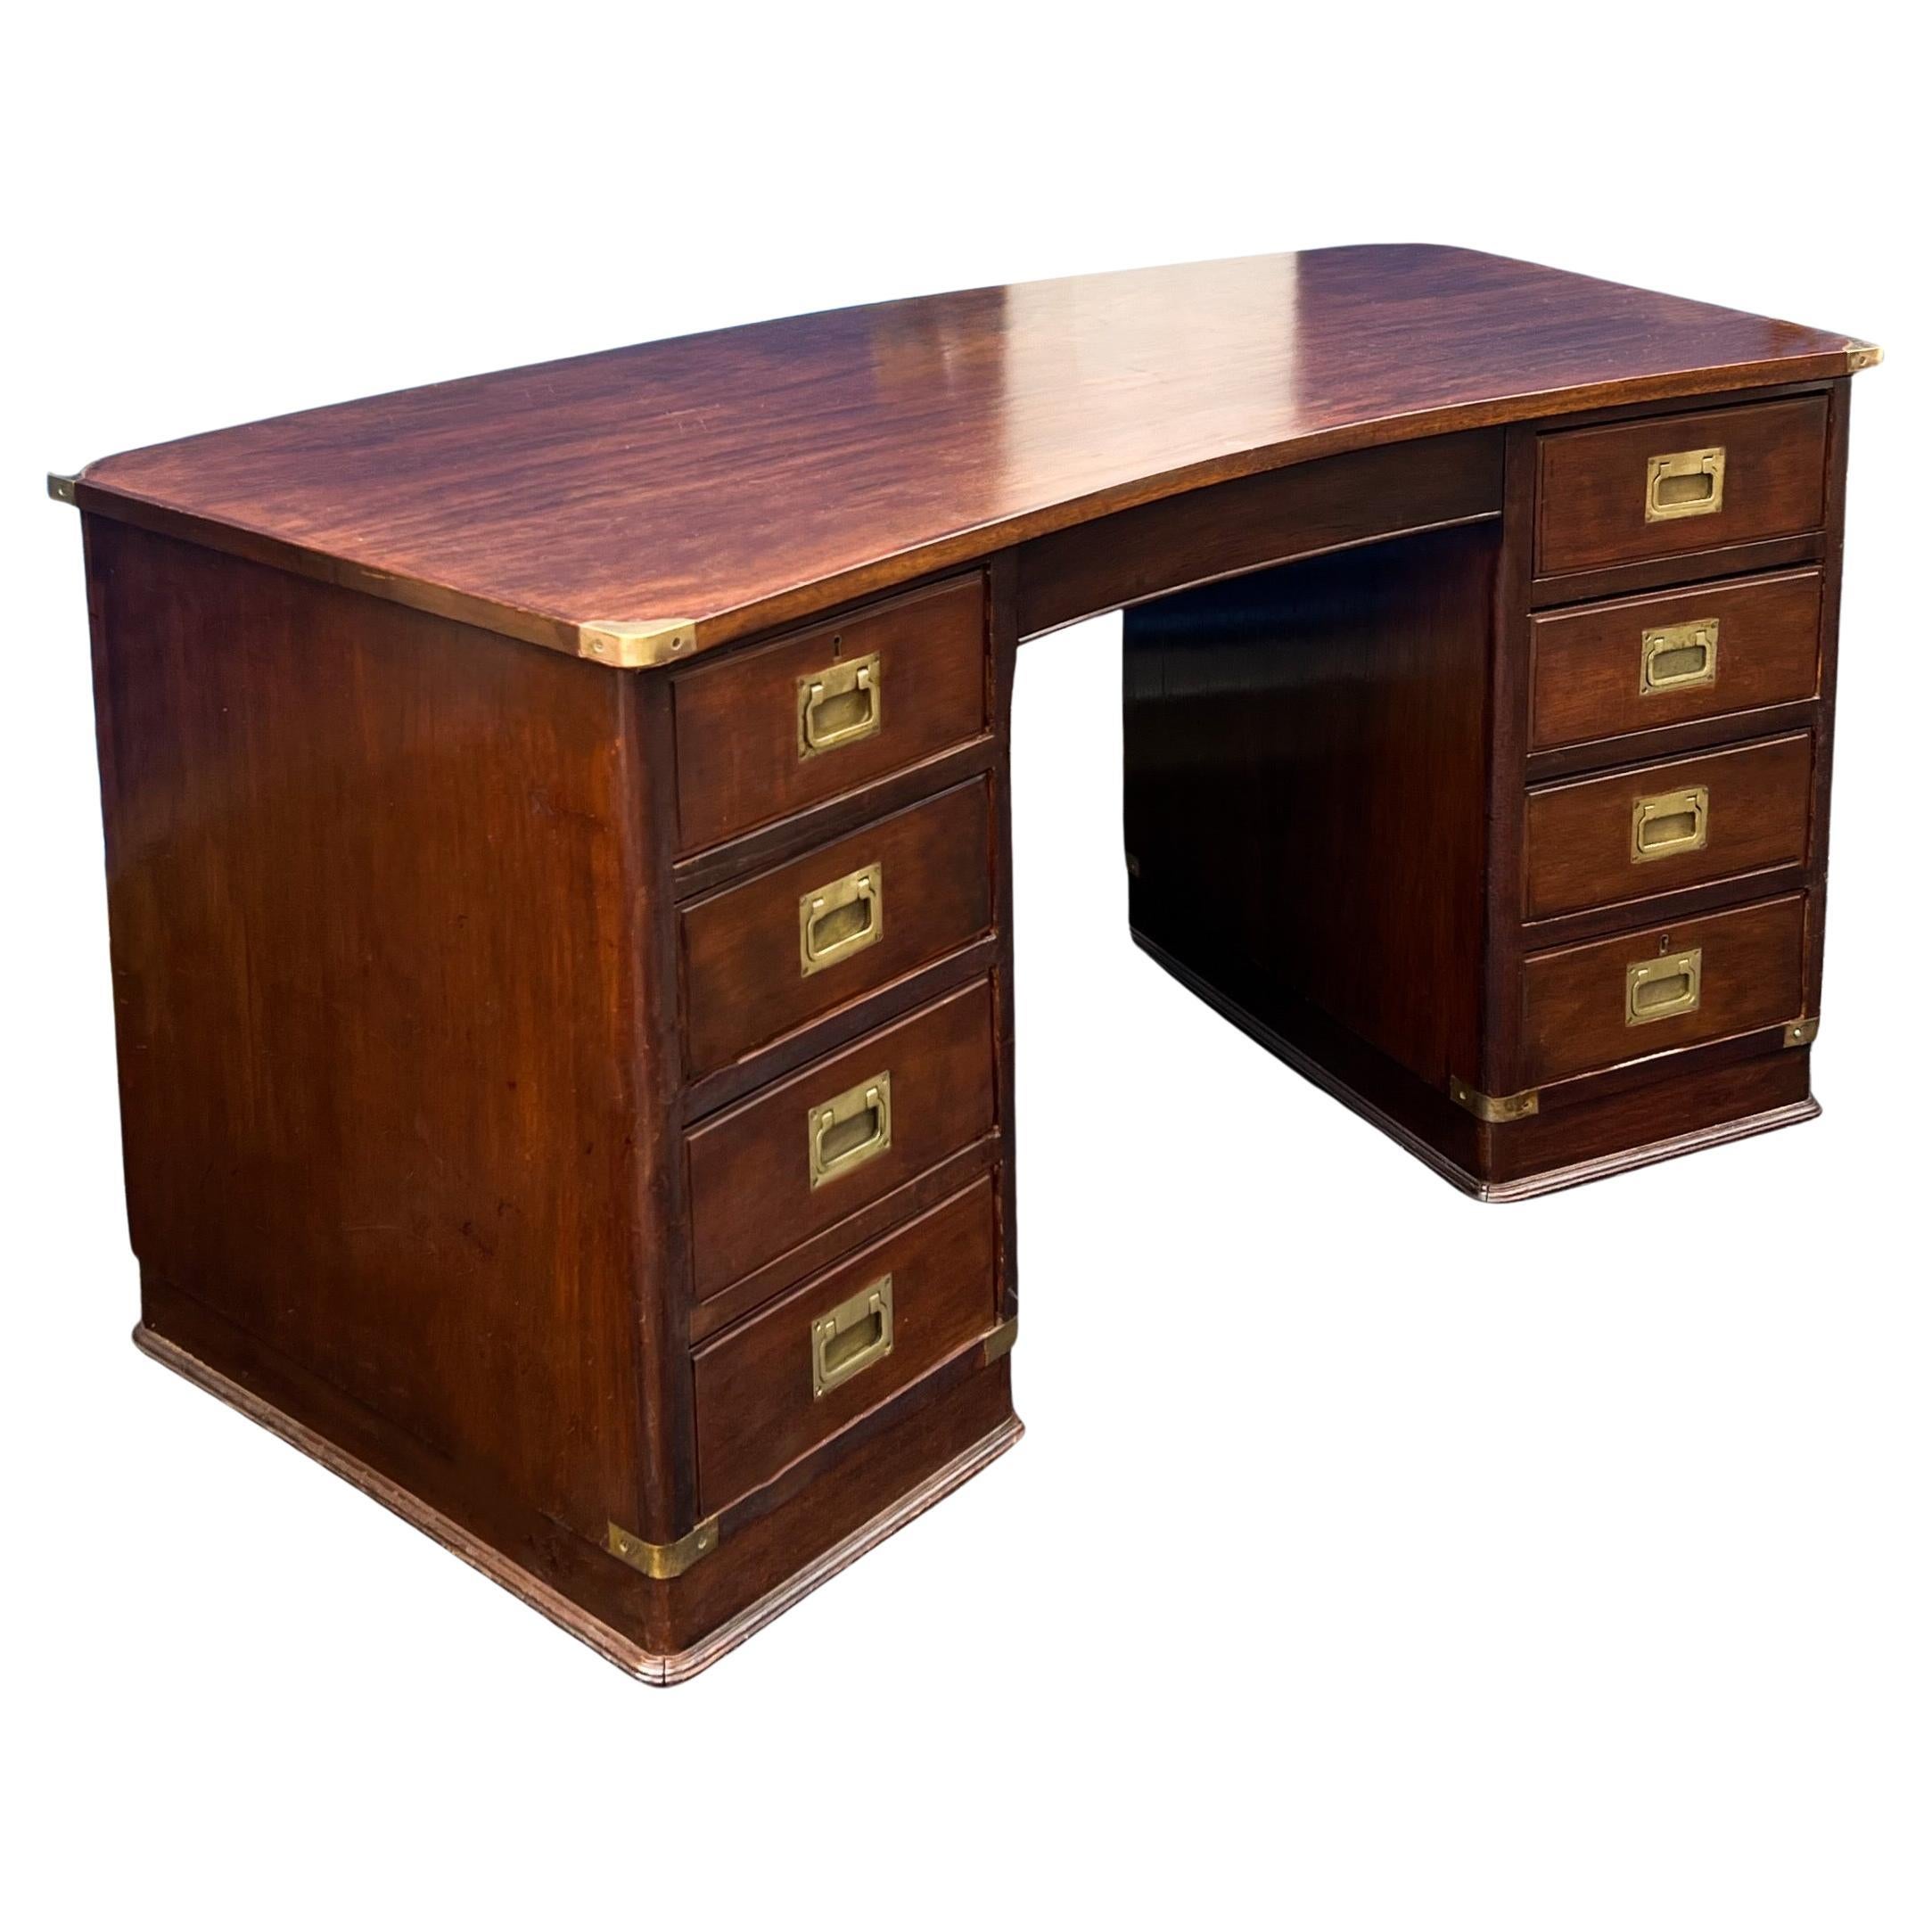 This is a 1950s English mahogany and brass campaign style desk. It is marked with a back brass plate. The drawers have dovetail construction. It has a subtle curving to the shape.

My shipping is for the Continental US only and running two to five